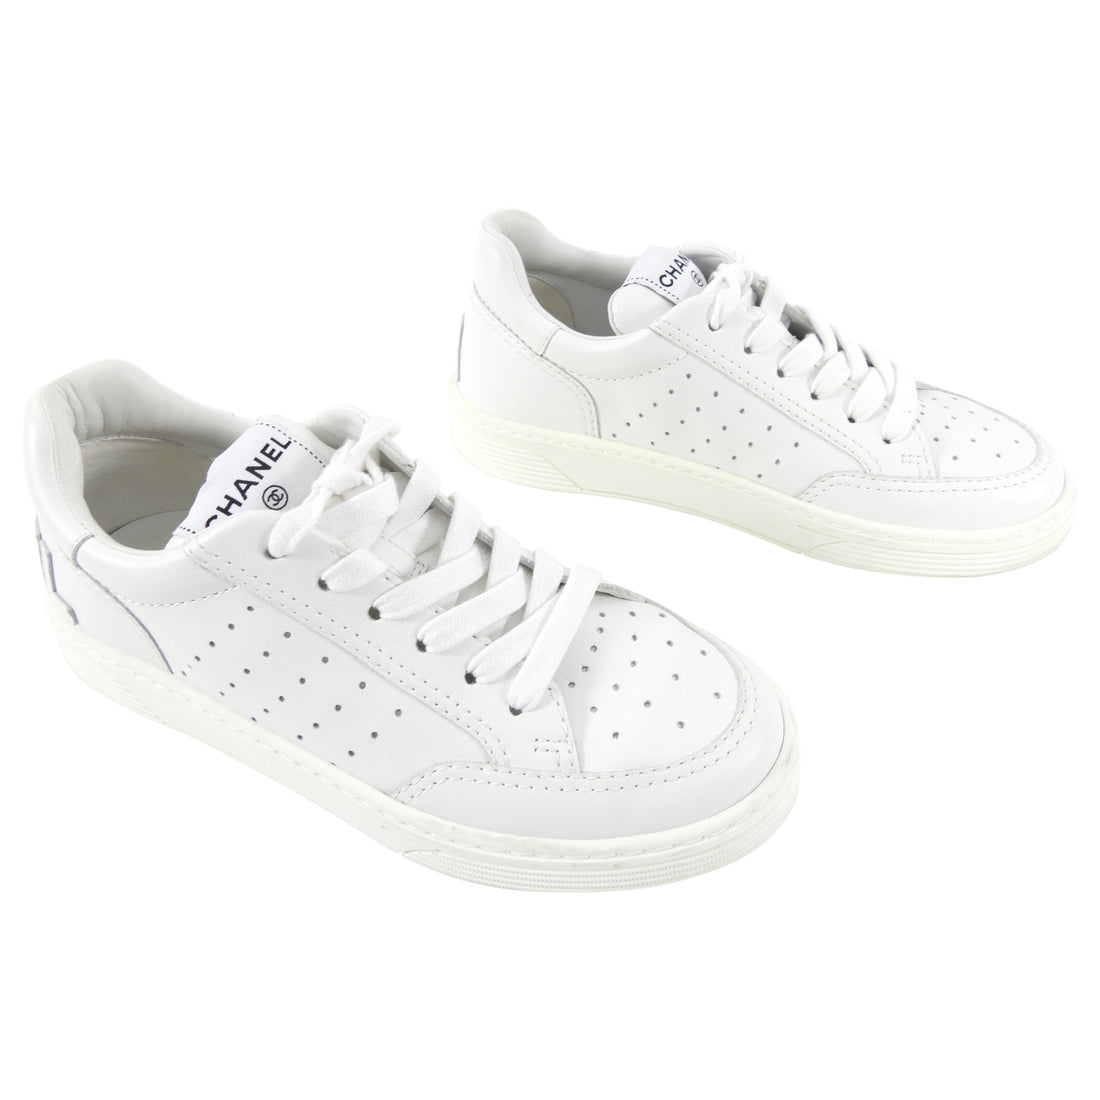 New 2022 Chanel White Leather Lace Up Trainer Sneakers Size 39  eBay